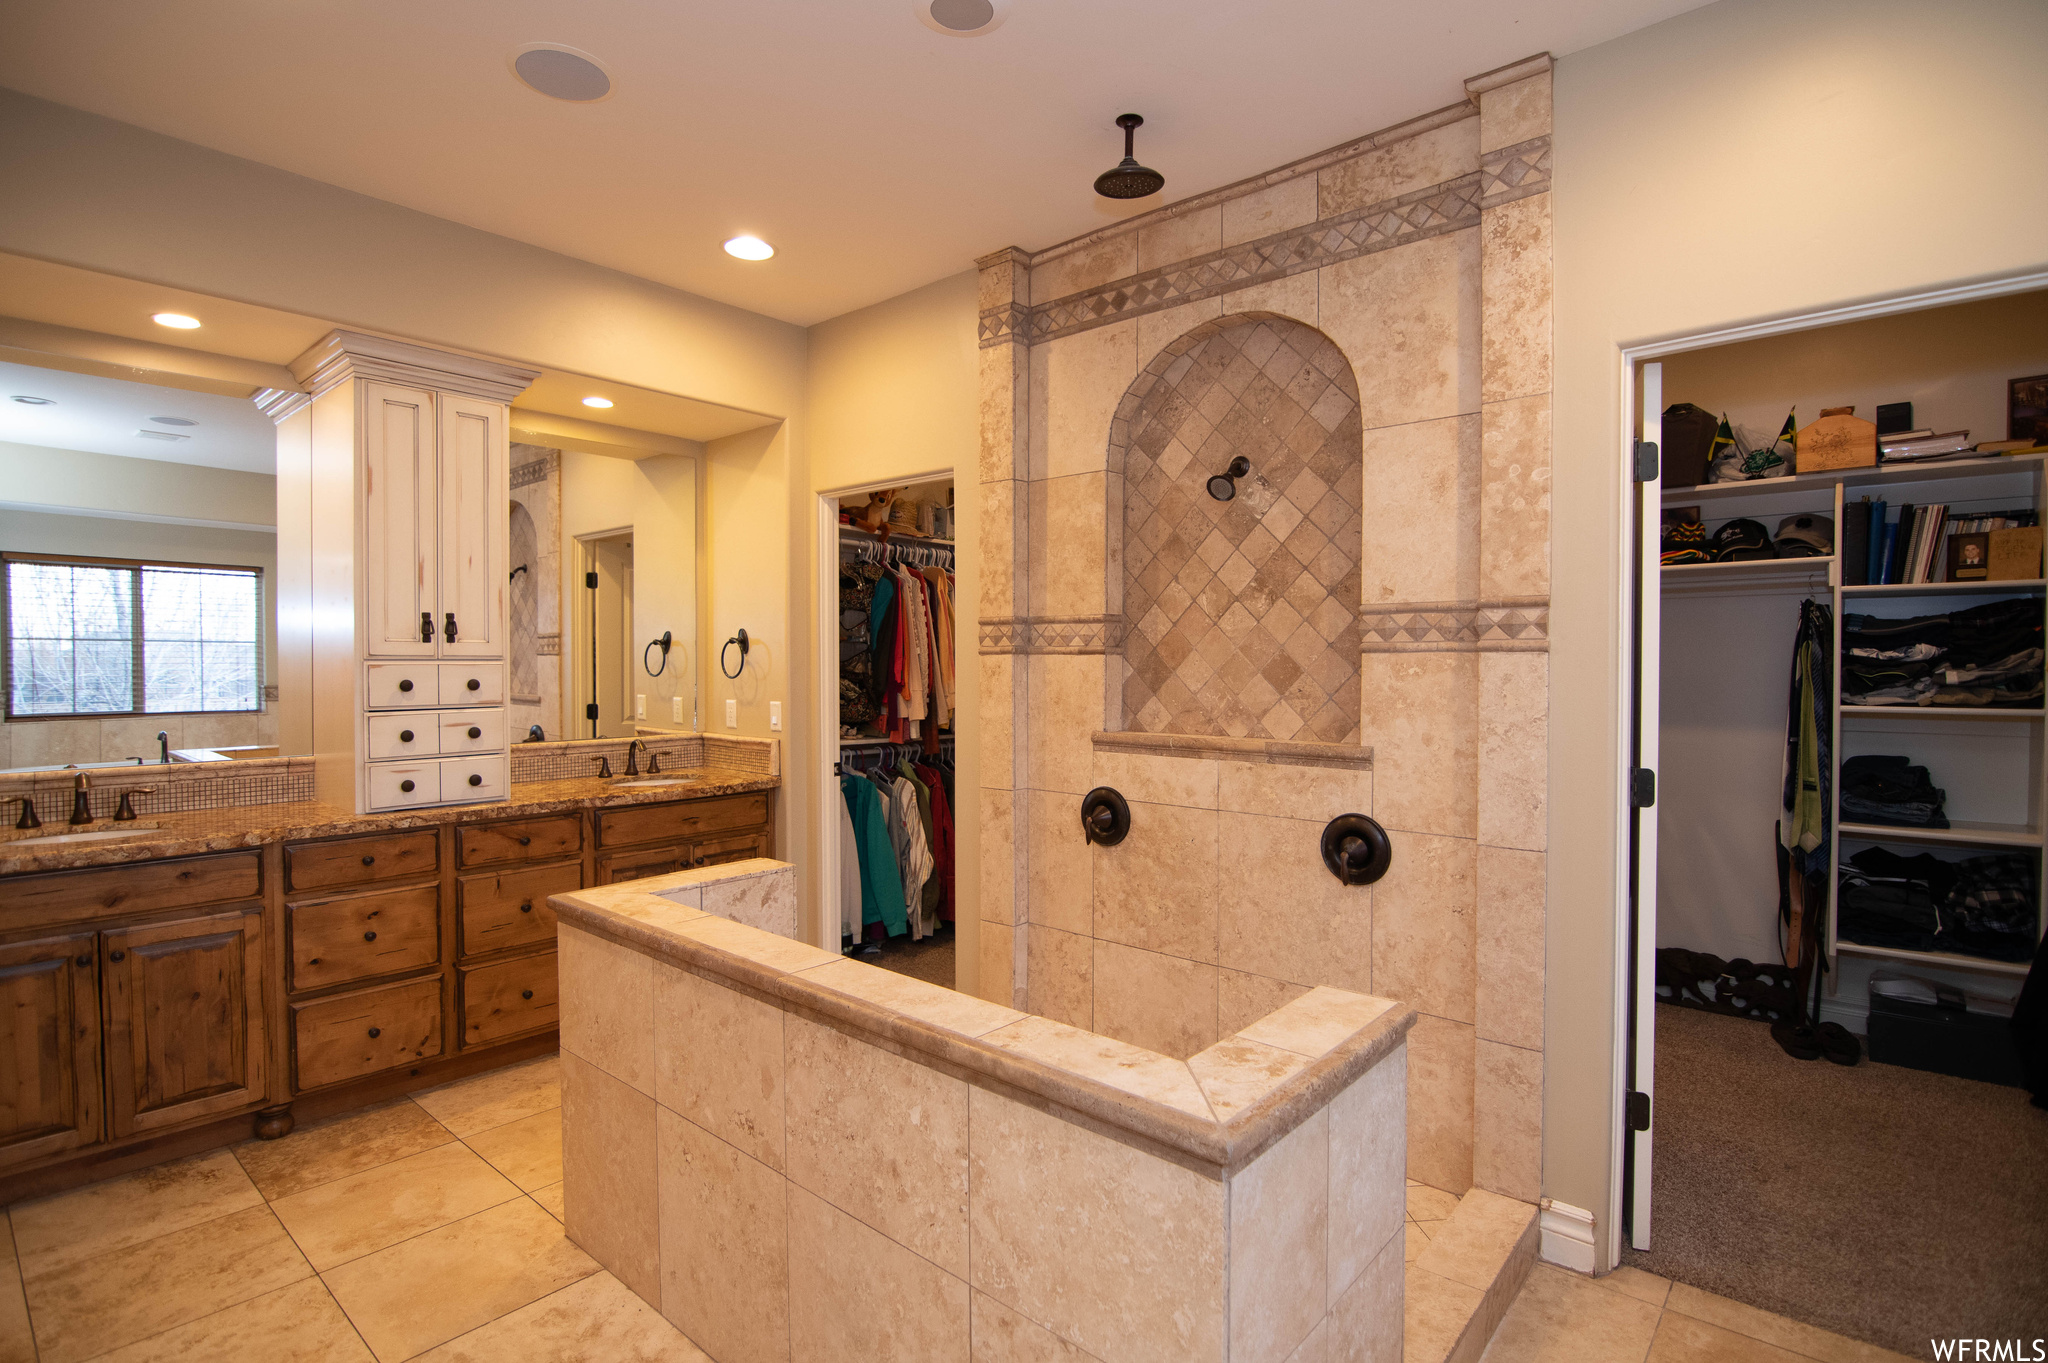 Bathroom featuring ornate columns, tile flooring, double sink vanity, and a tile shower